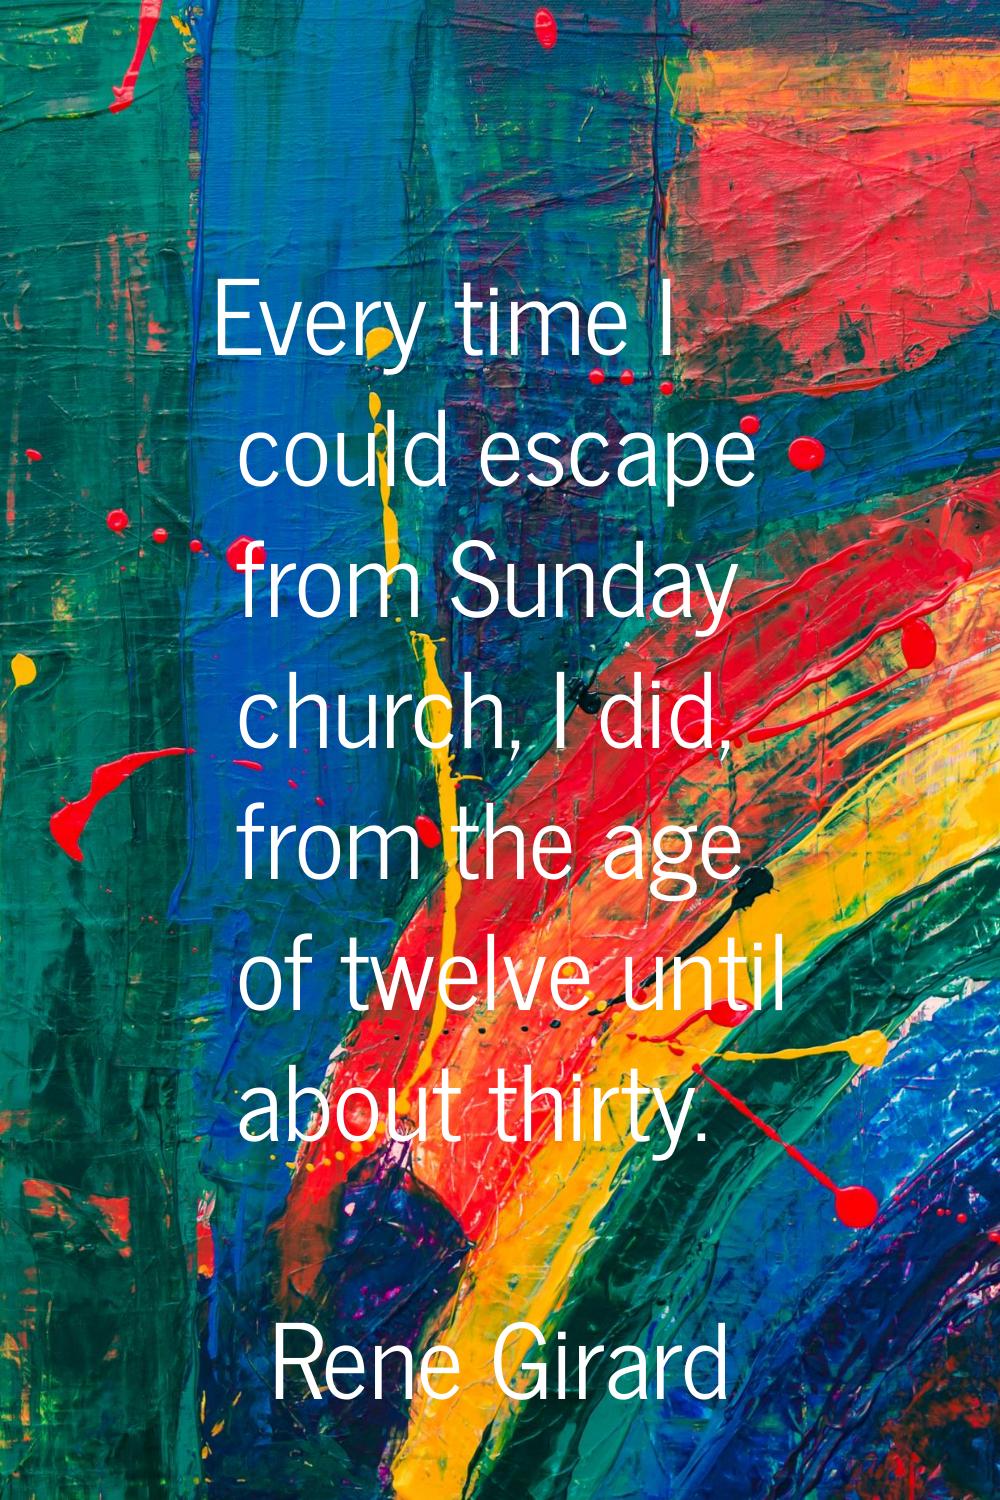 Every time I could escape from Sunday church, I did, from the age of twelve until about thirty.